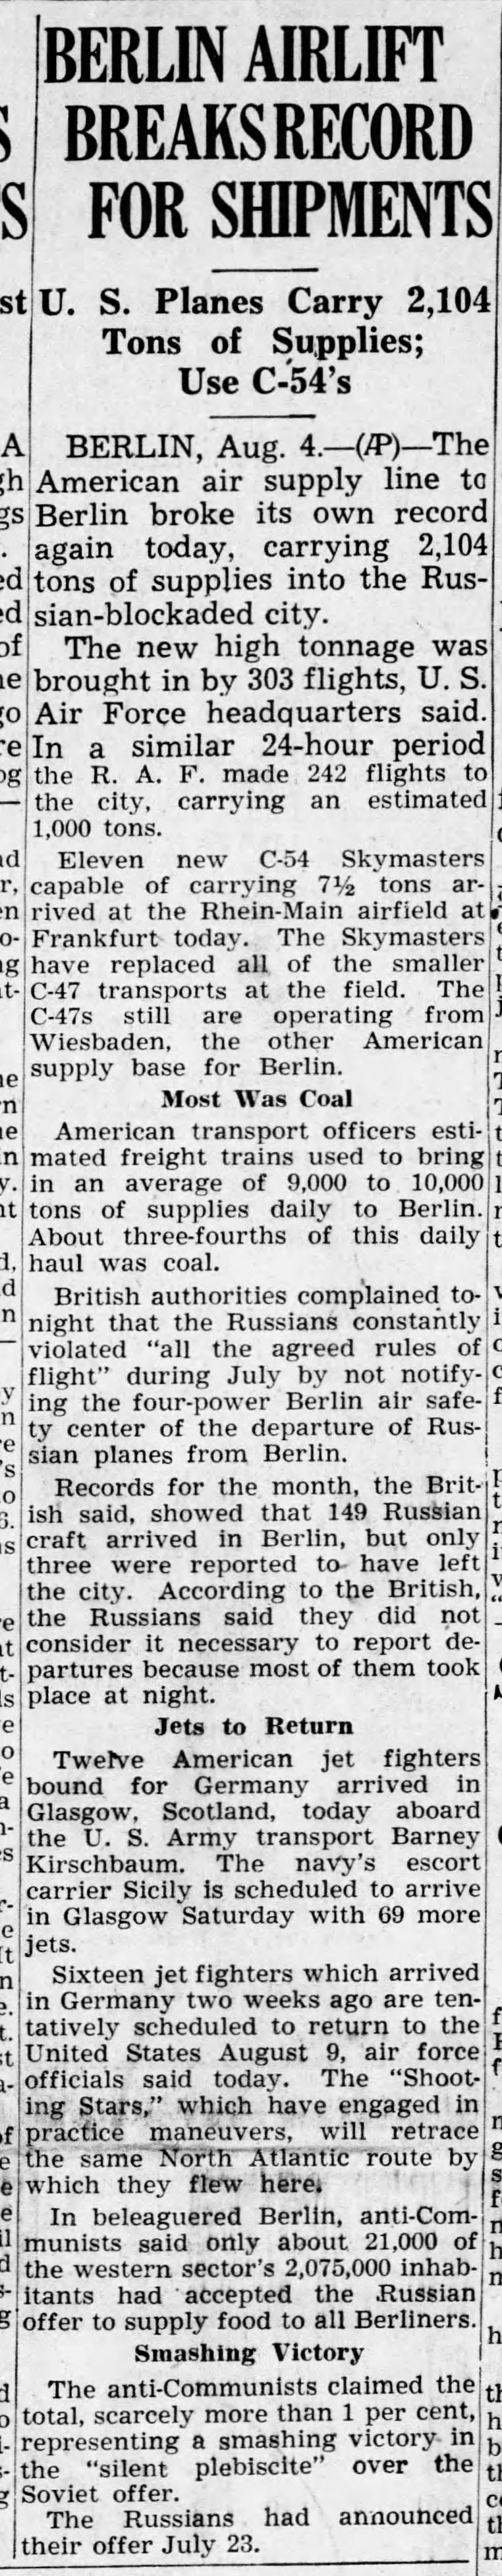 "Berlin Airlift breaks record for shipments" in August 1948